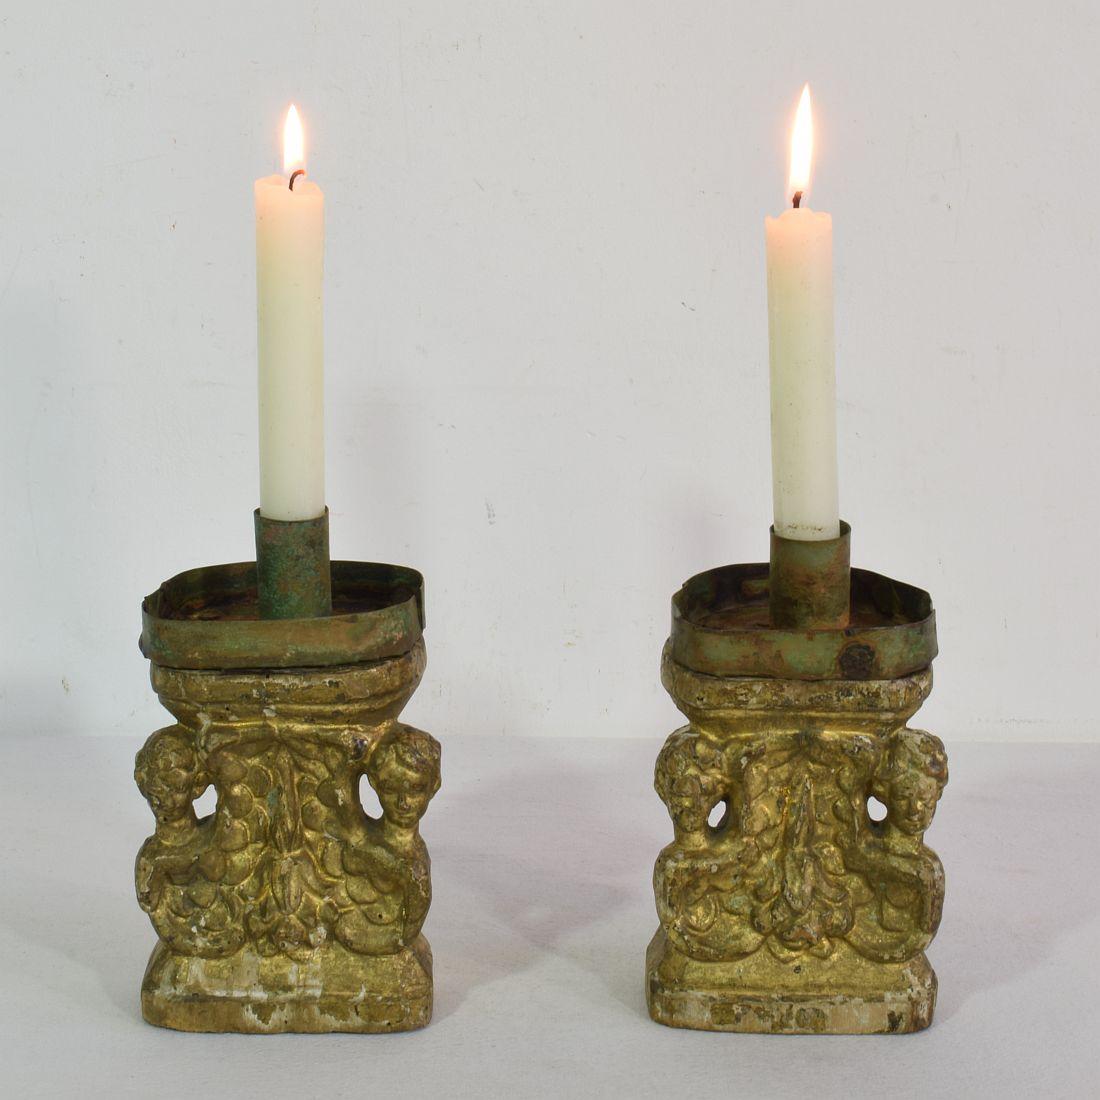 Wondeful small Baroque giltwood candleholders with angels, Italy, circa 1650-1750. Weathered, repairs and small losses. Actual copper candleholders on top are of later date.
Measurement individual.